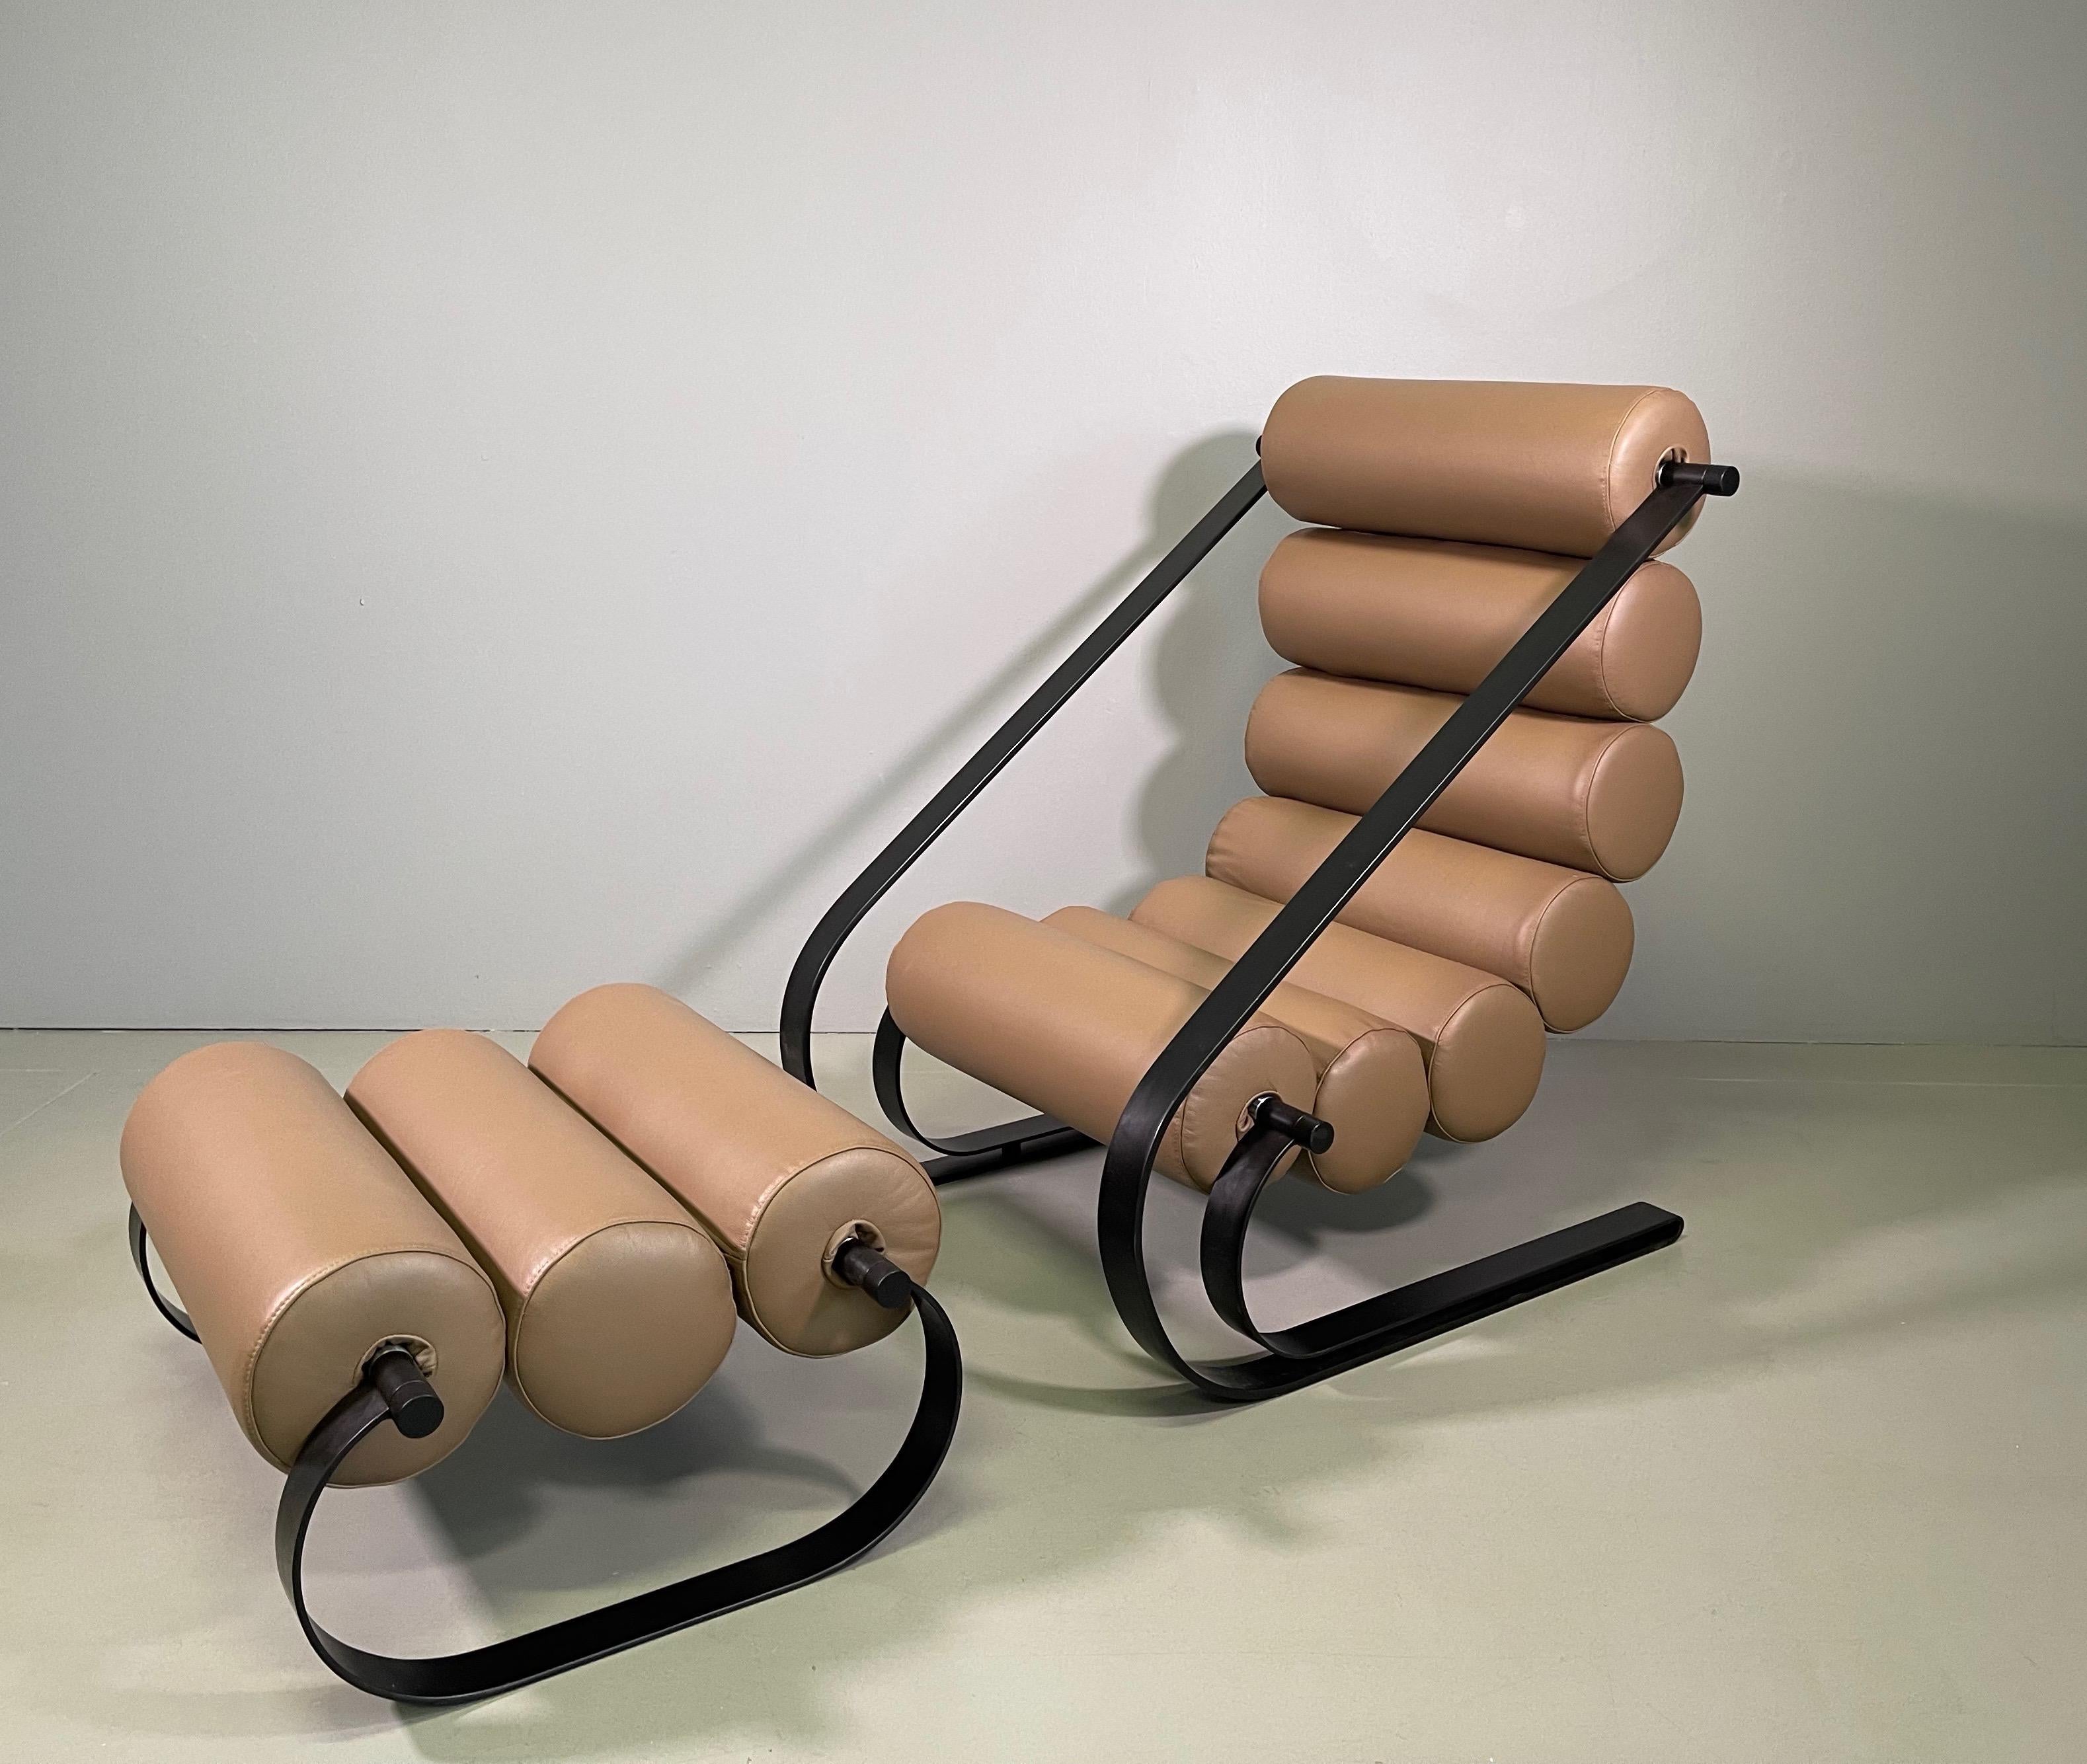 Marzio Cecchi for Most, 'Balestra' lounge chair and ottoman, Italy, 1968. 
Modern sprung steel Balestra lounge chair and ottoman designed by Florentine architect Marzio Cecchi in 1968 and produced by Cecchi's Studio Most. 
The seat has a playful